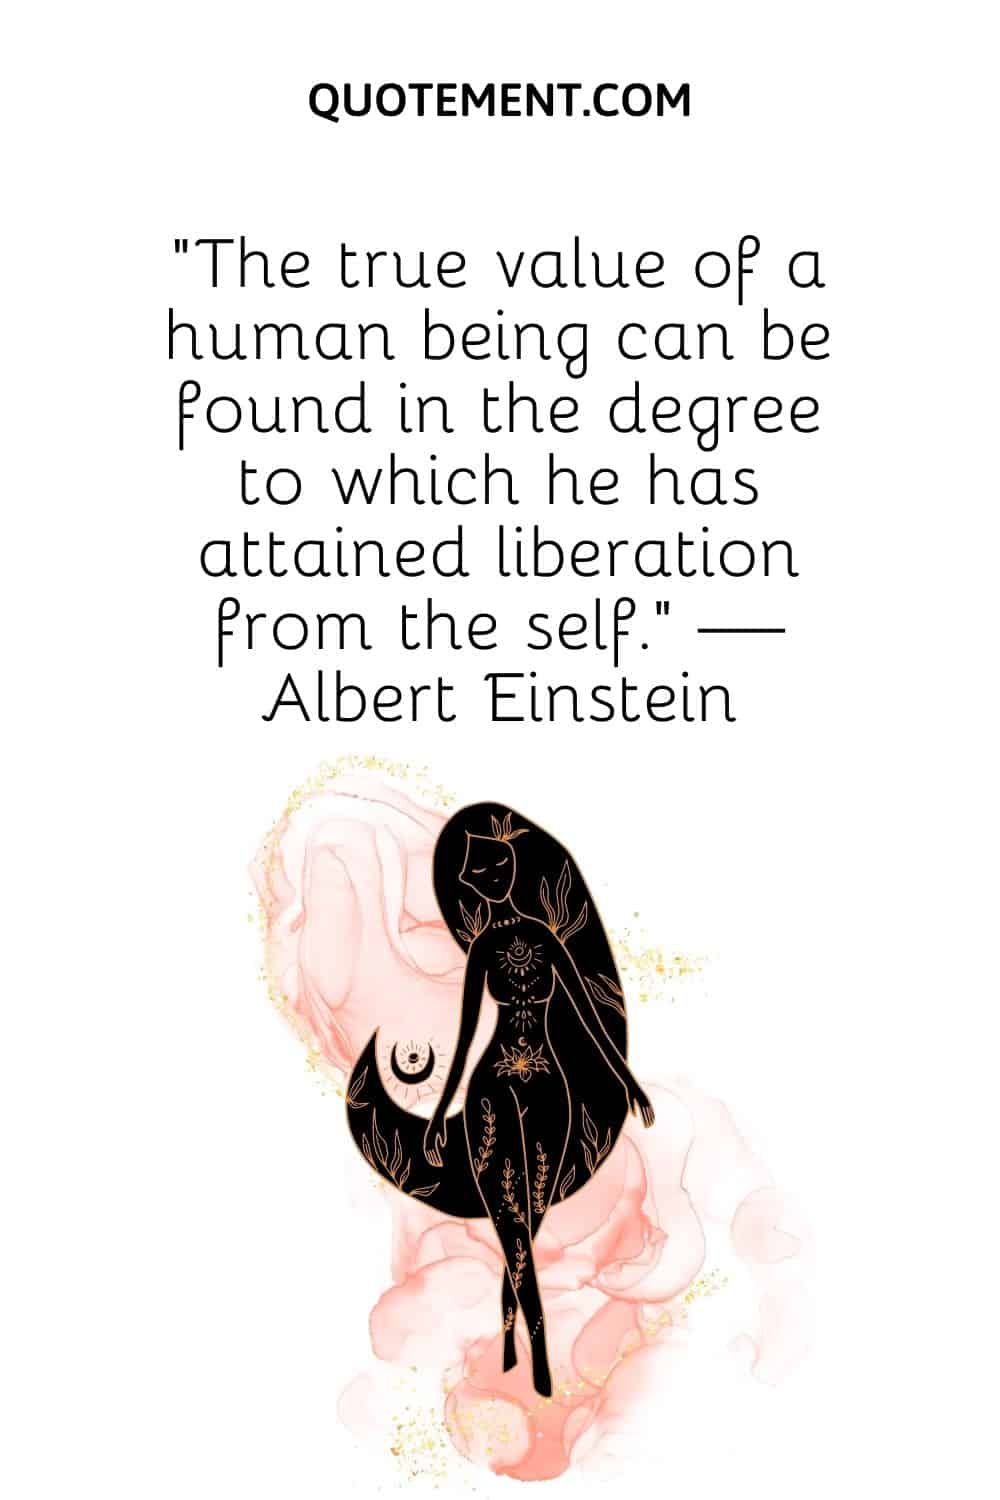 The true value of a human being can be found in the degree to which he has attained liberation from the self